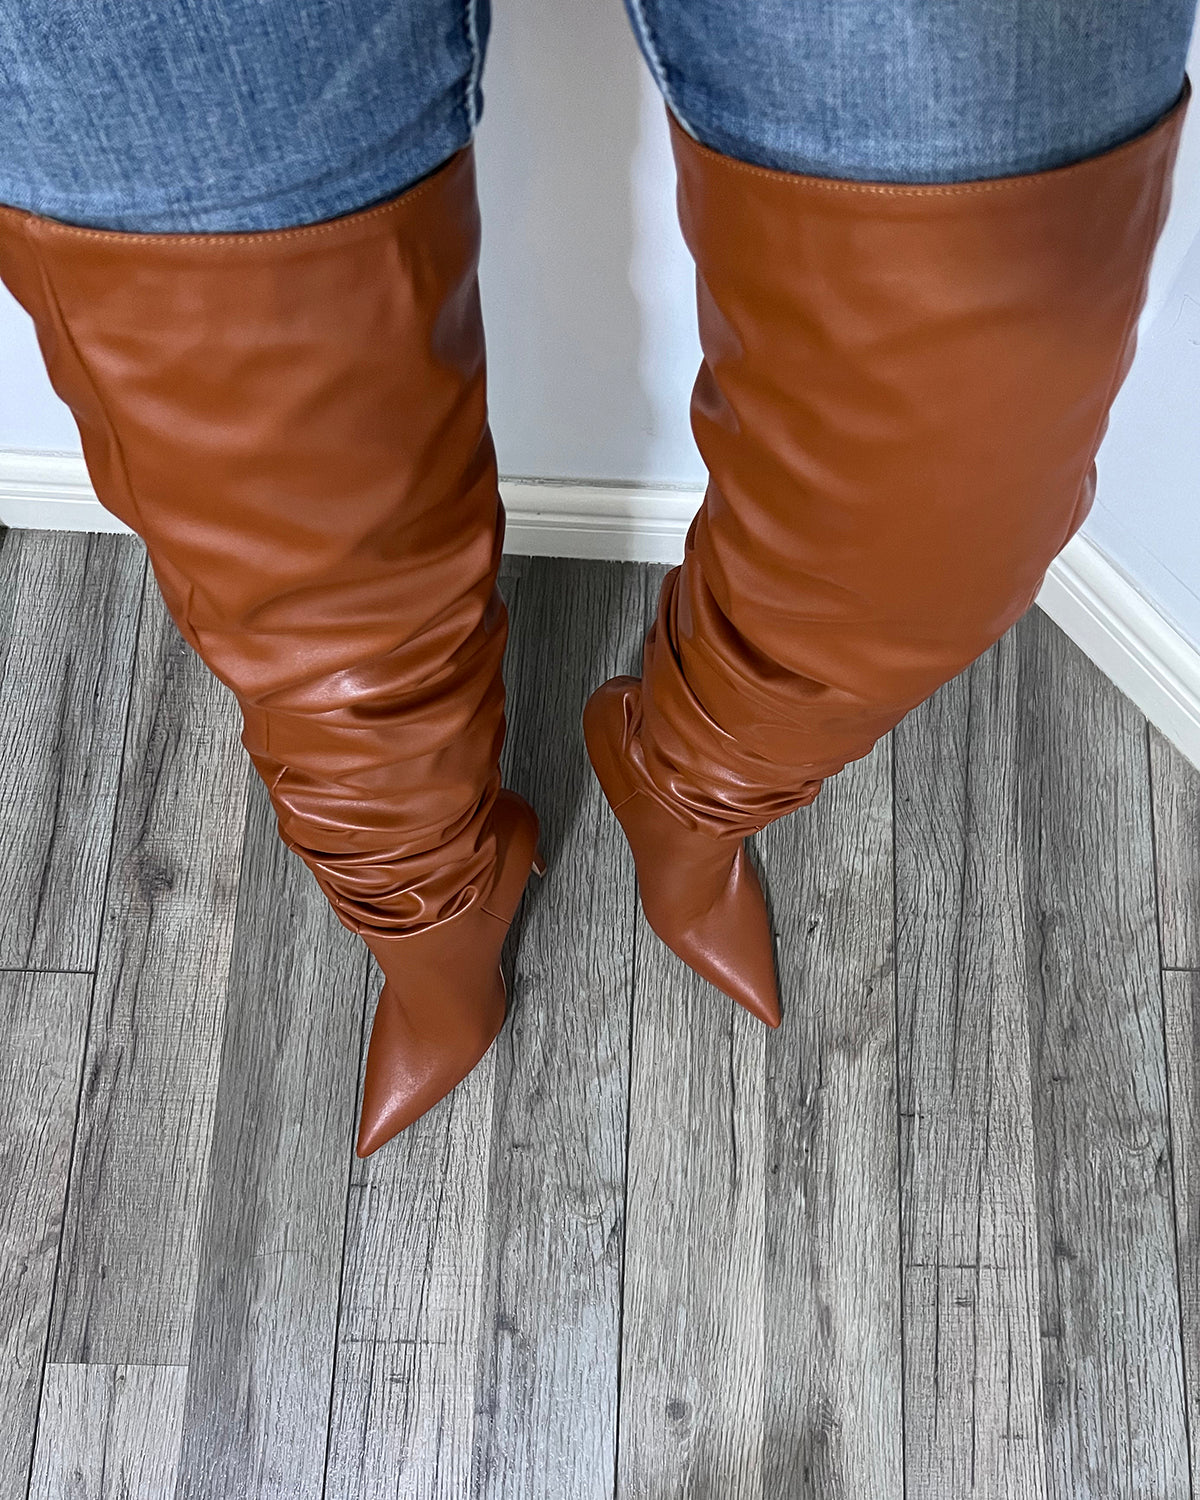 Thigh high matte leather wrinkle stiletto heel boots